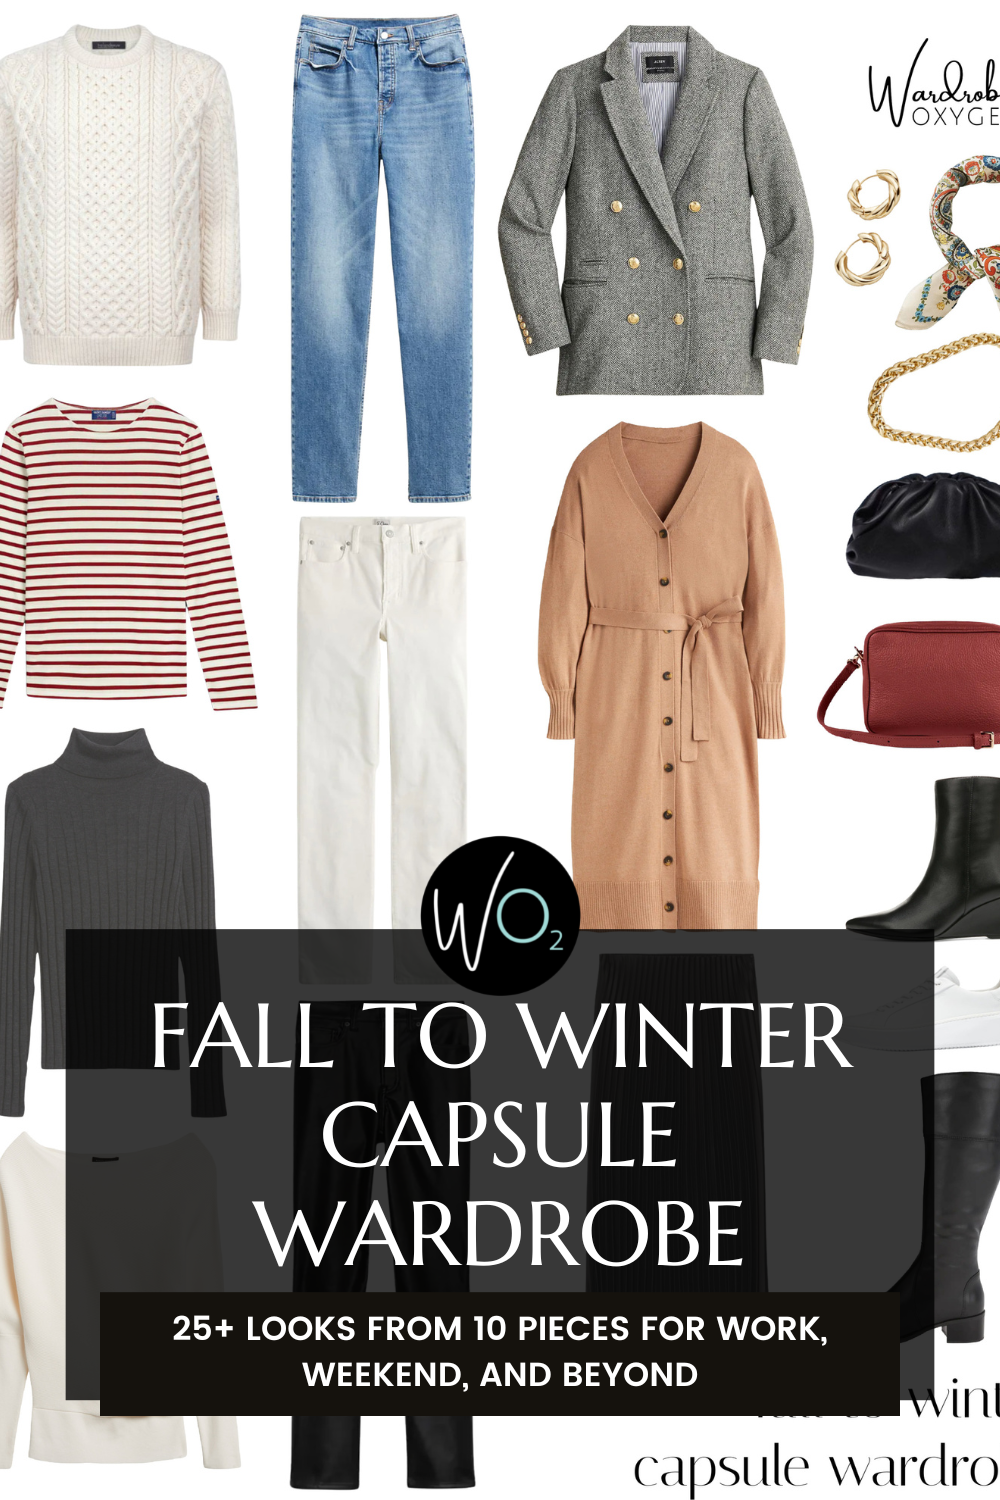 Fall to Winter Capsule Wardrobe 25+ Looks for Work, Weekend, and